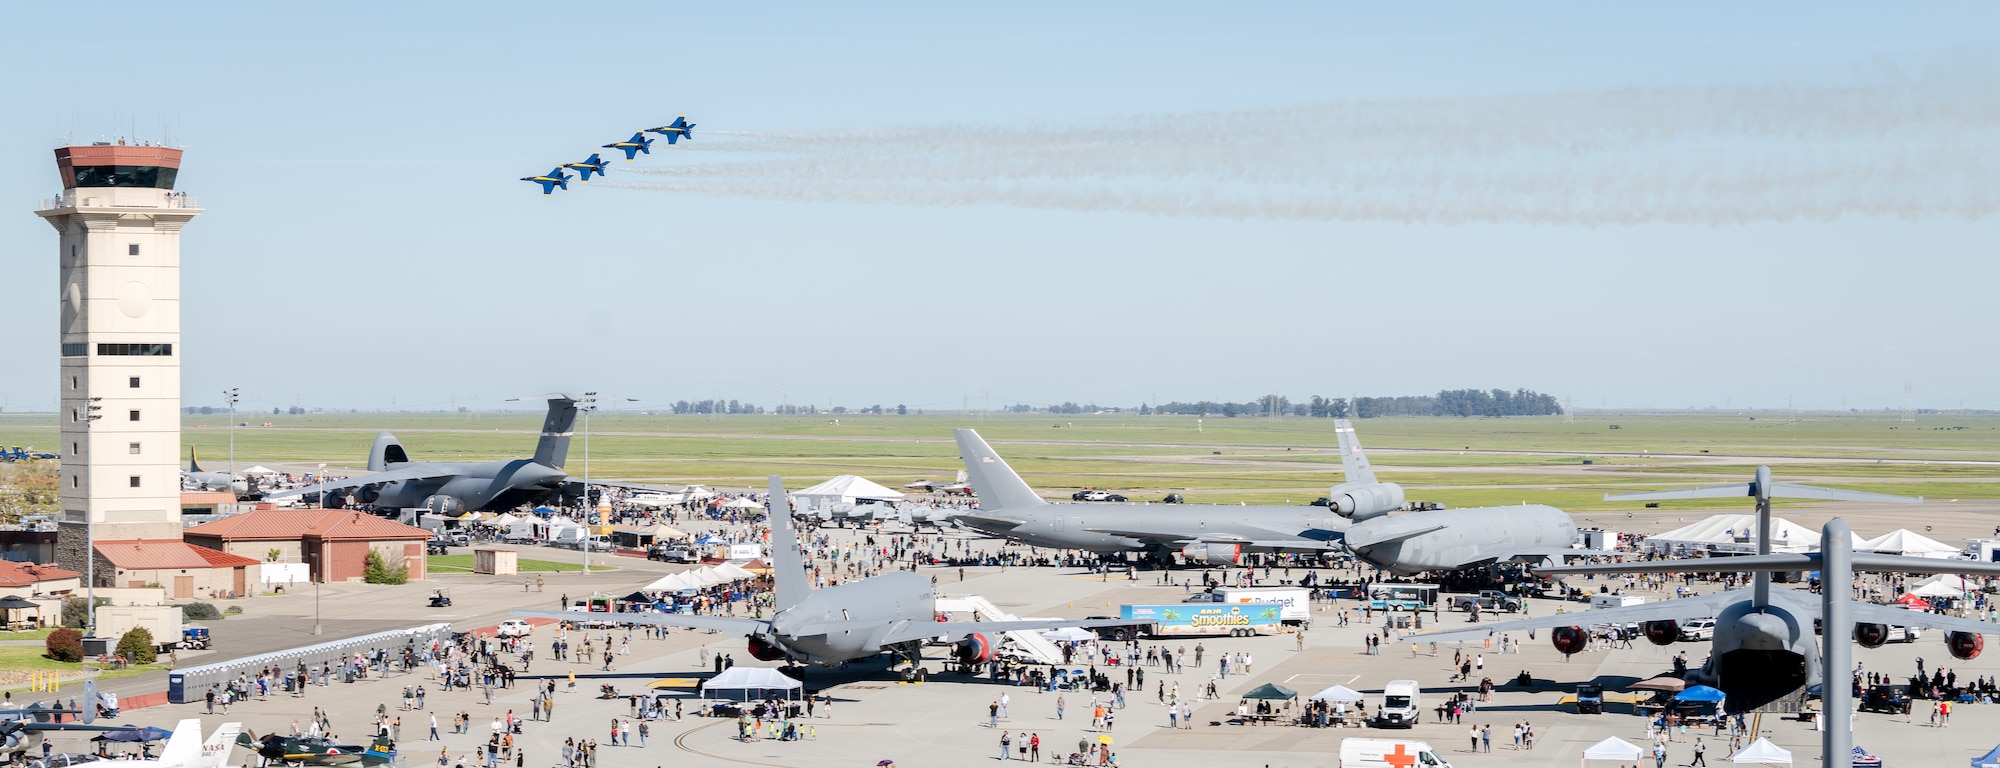 An aerial view of the Travis Air Force Base flight line during the air show